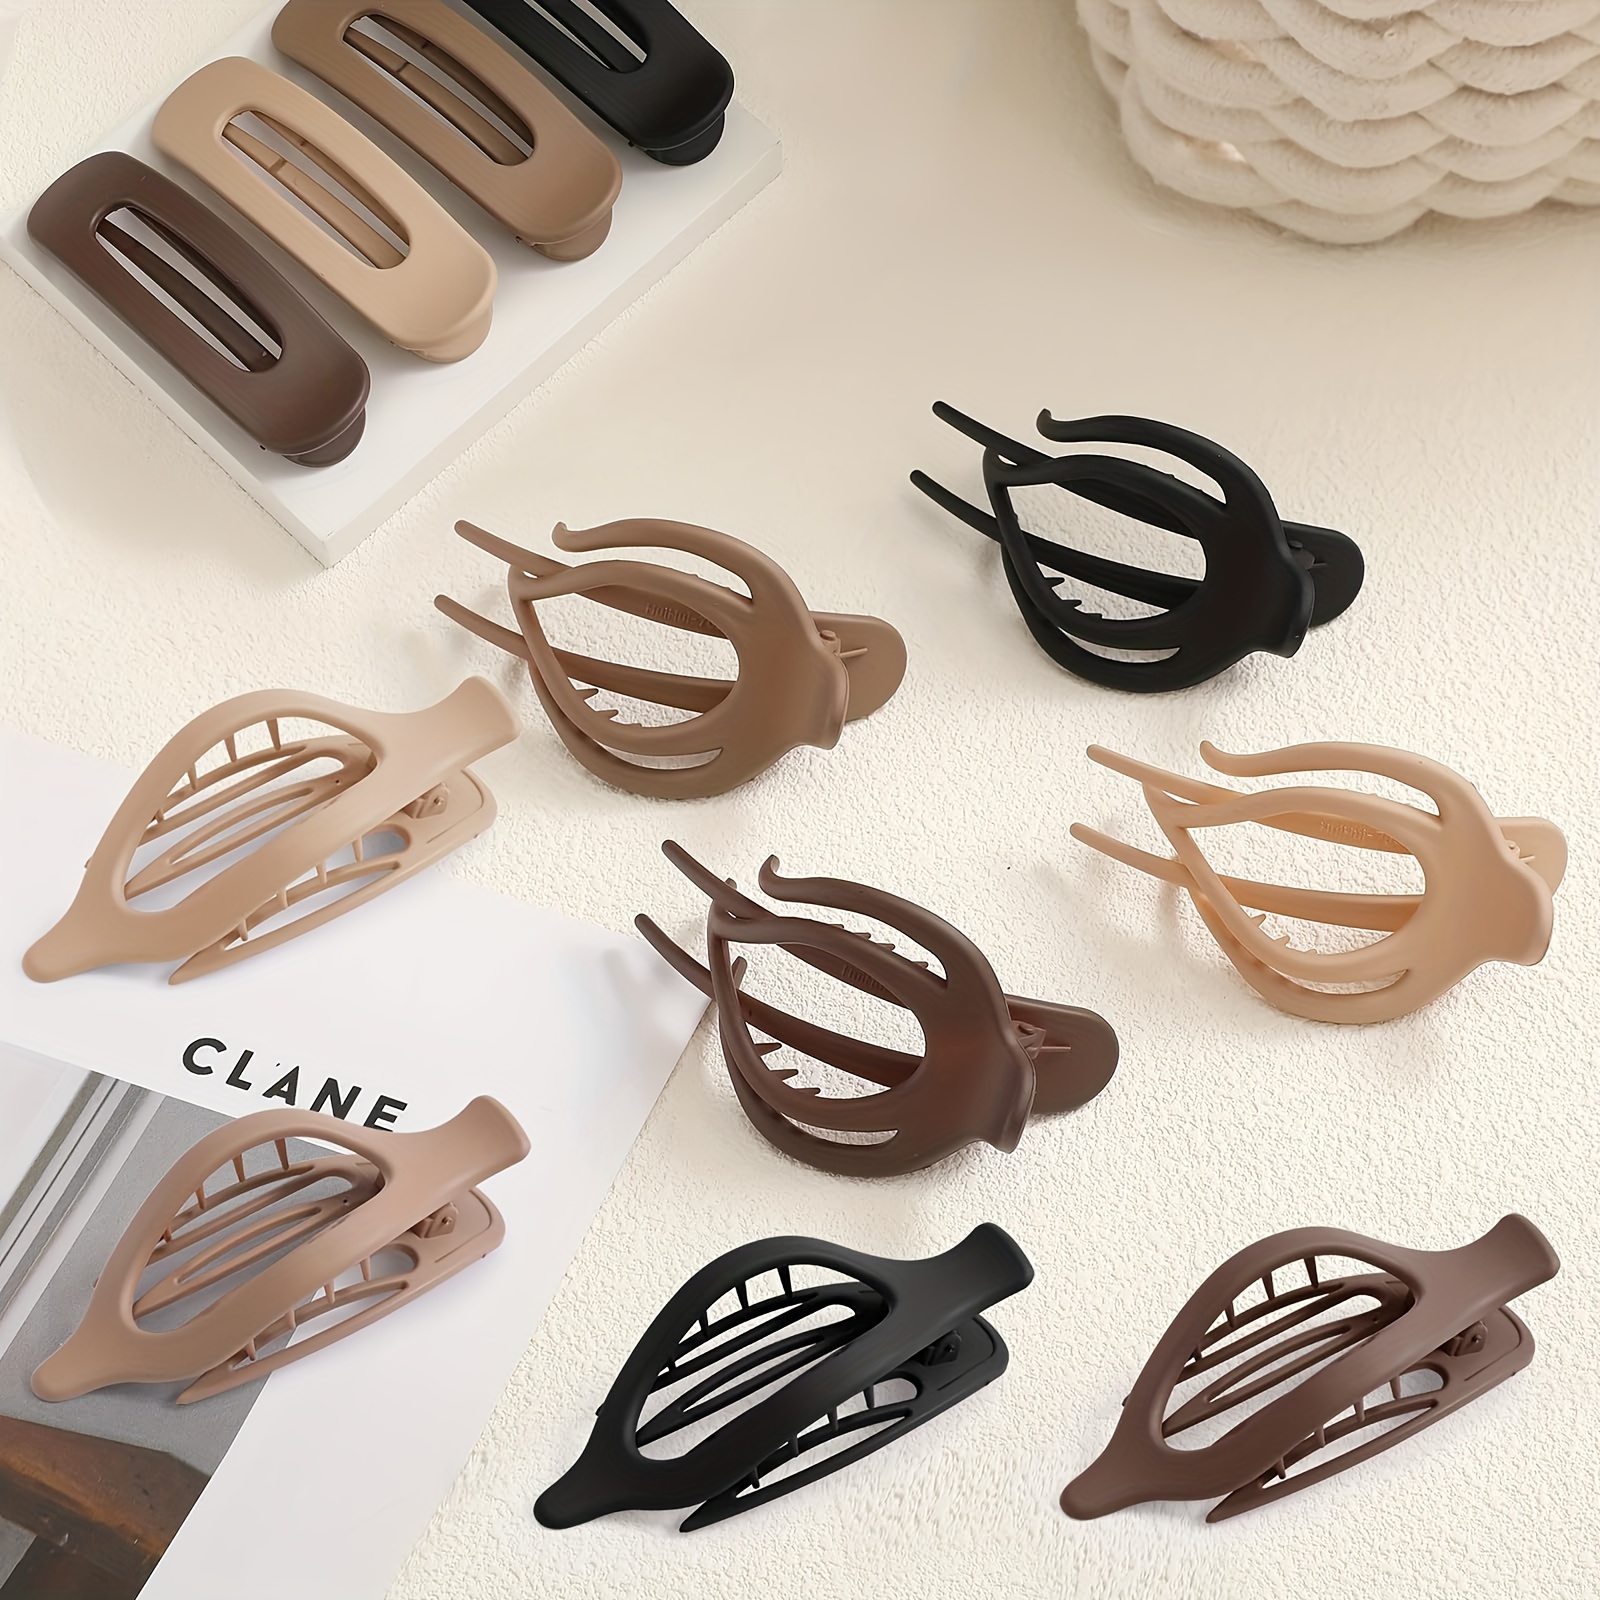 

12 Pack Flat Hair Clips, French Design Flat Hair Clips, French Concord Hair Clips, Alligator Hair Clips For Women, Oval Barrette Jaw Clips, Strong Hold Side Hair Clamps, Matte Claw Clips For Thick